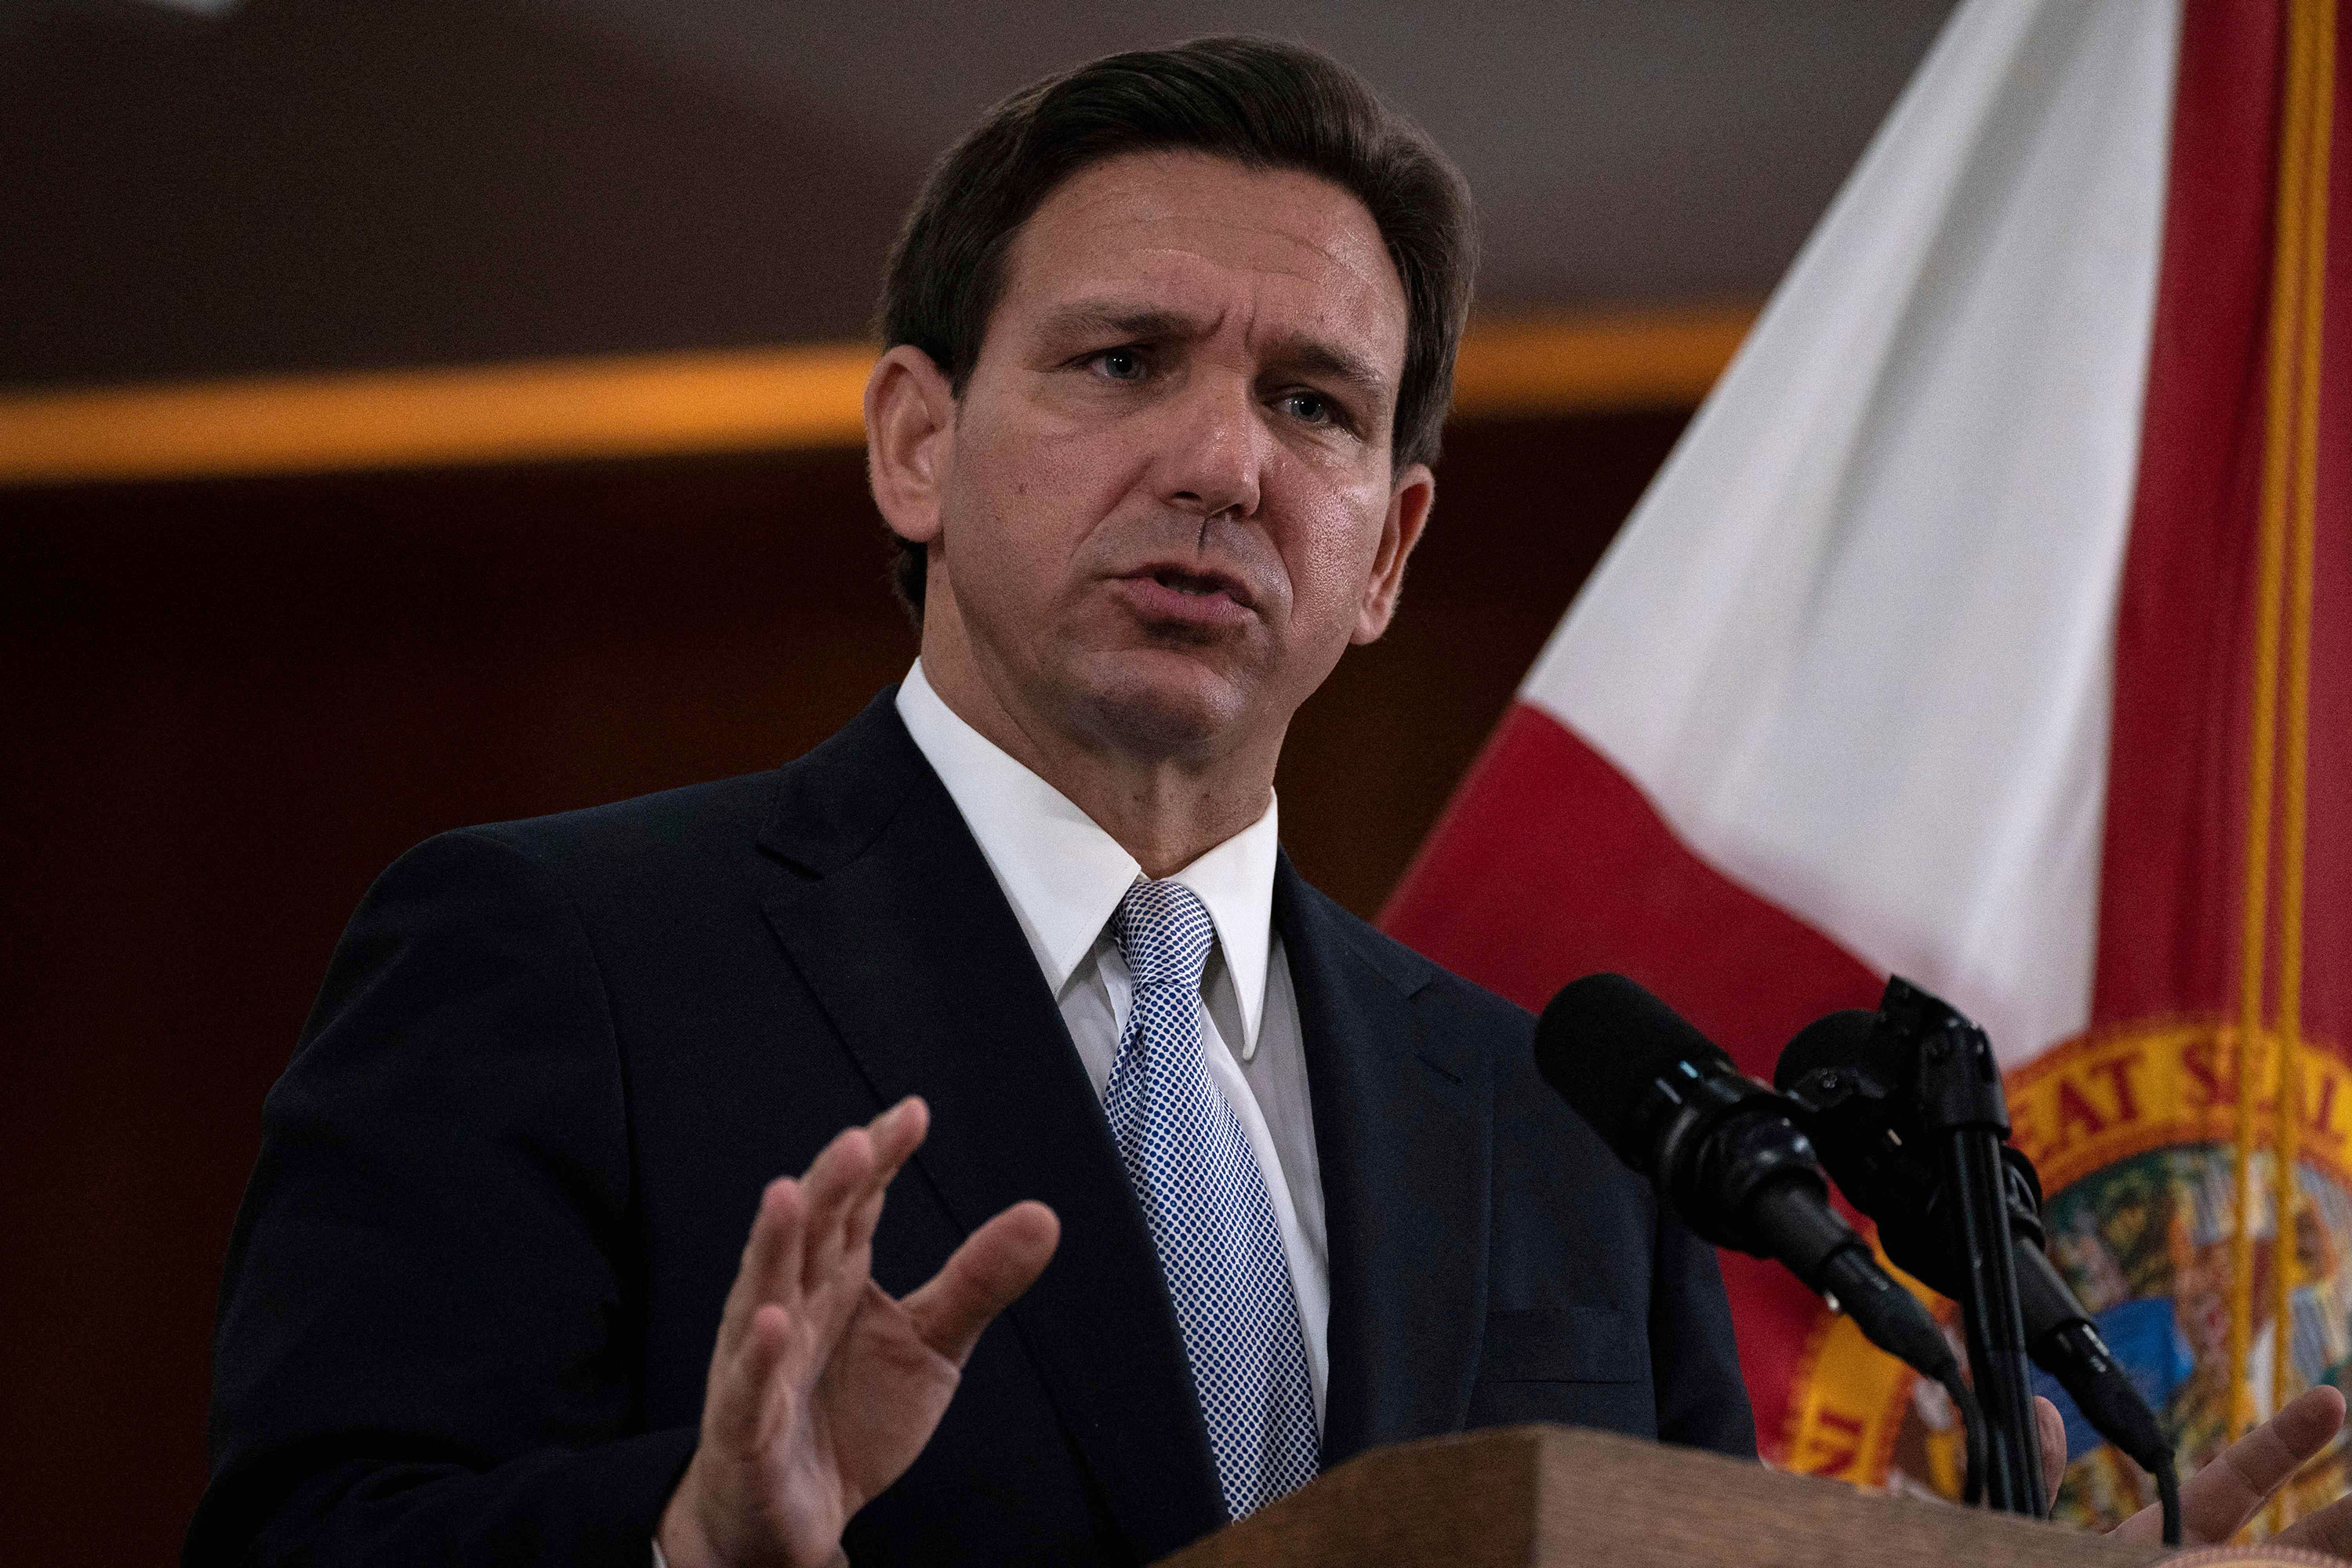 Florida Governor Ron DeSantis answers questions from the media at the Florida State Capitol in Tallahassee, Florida, on March 7. 